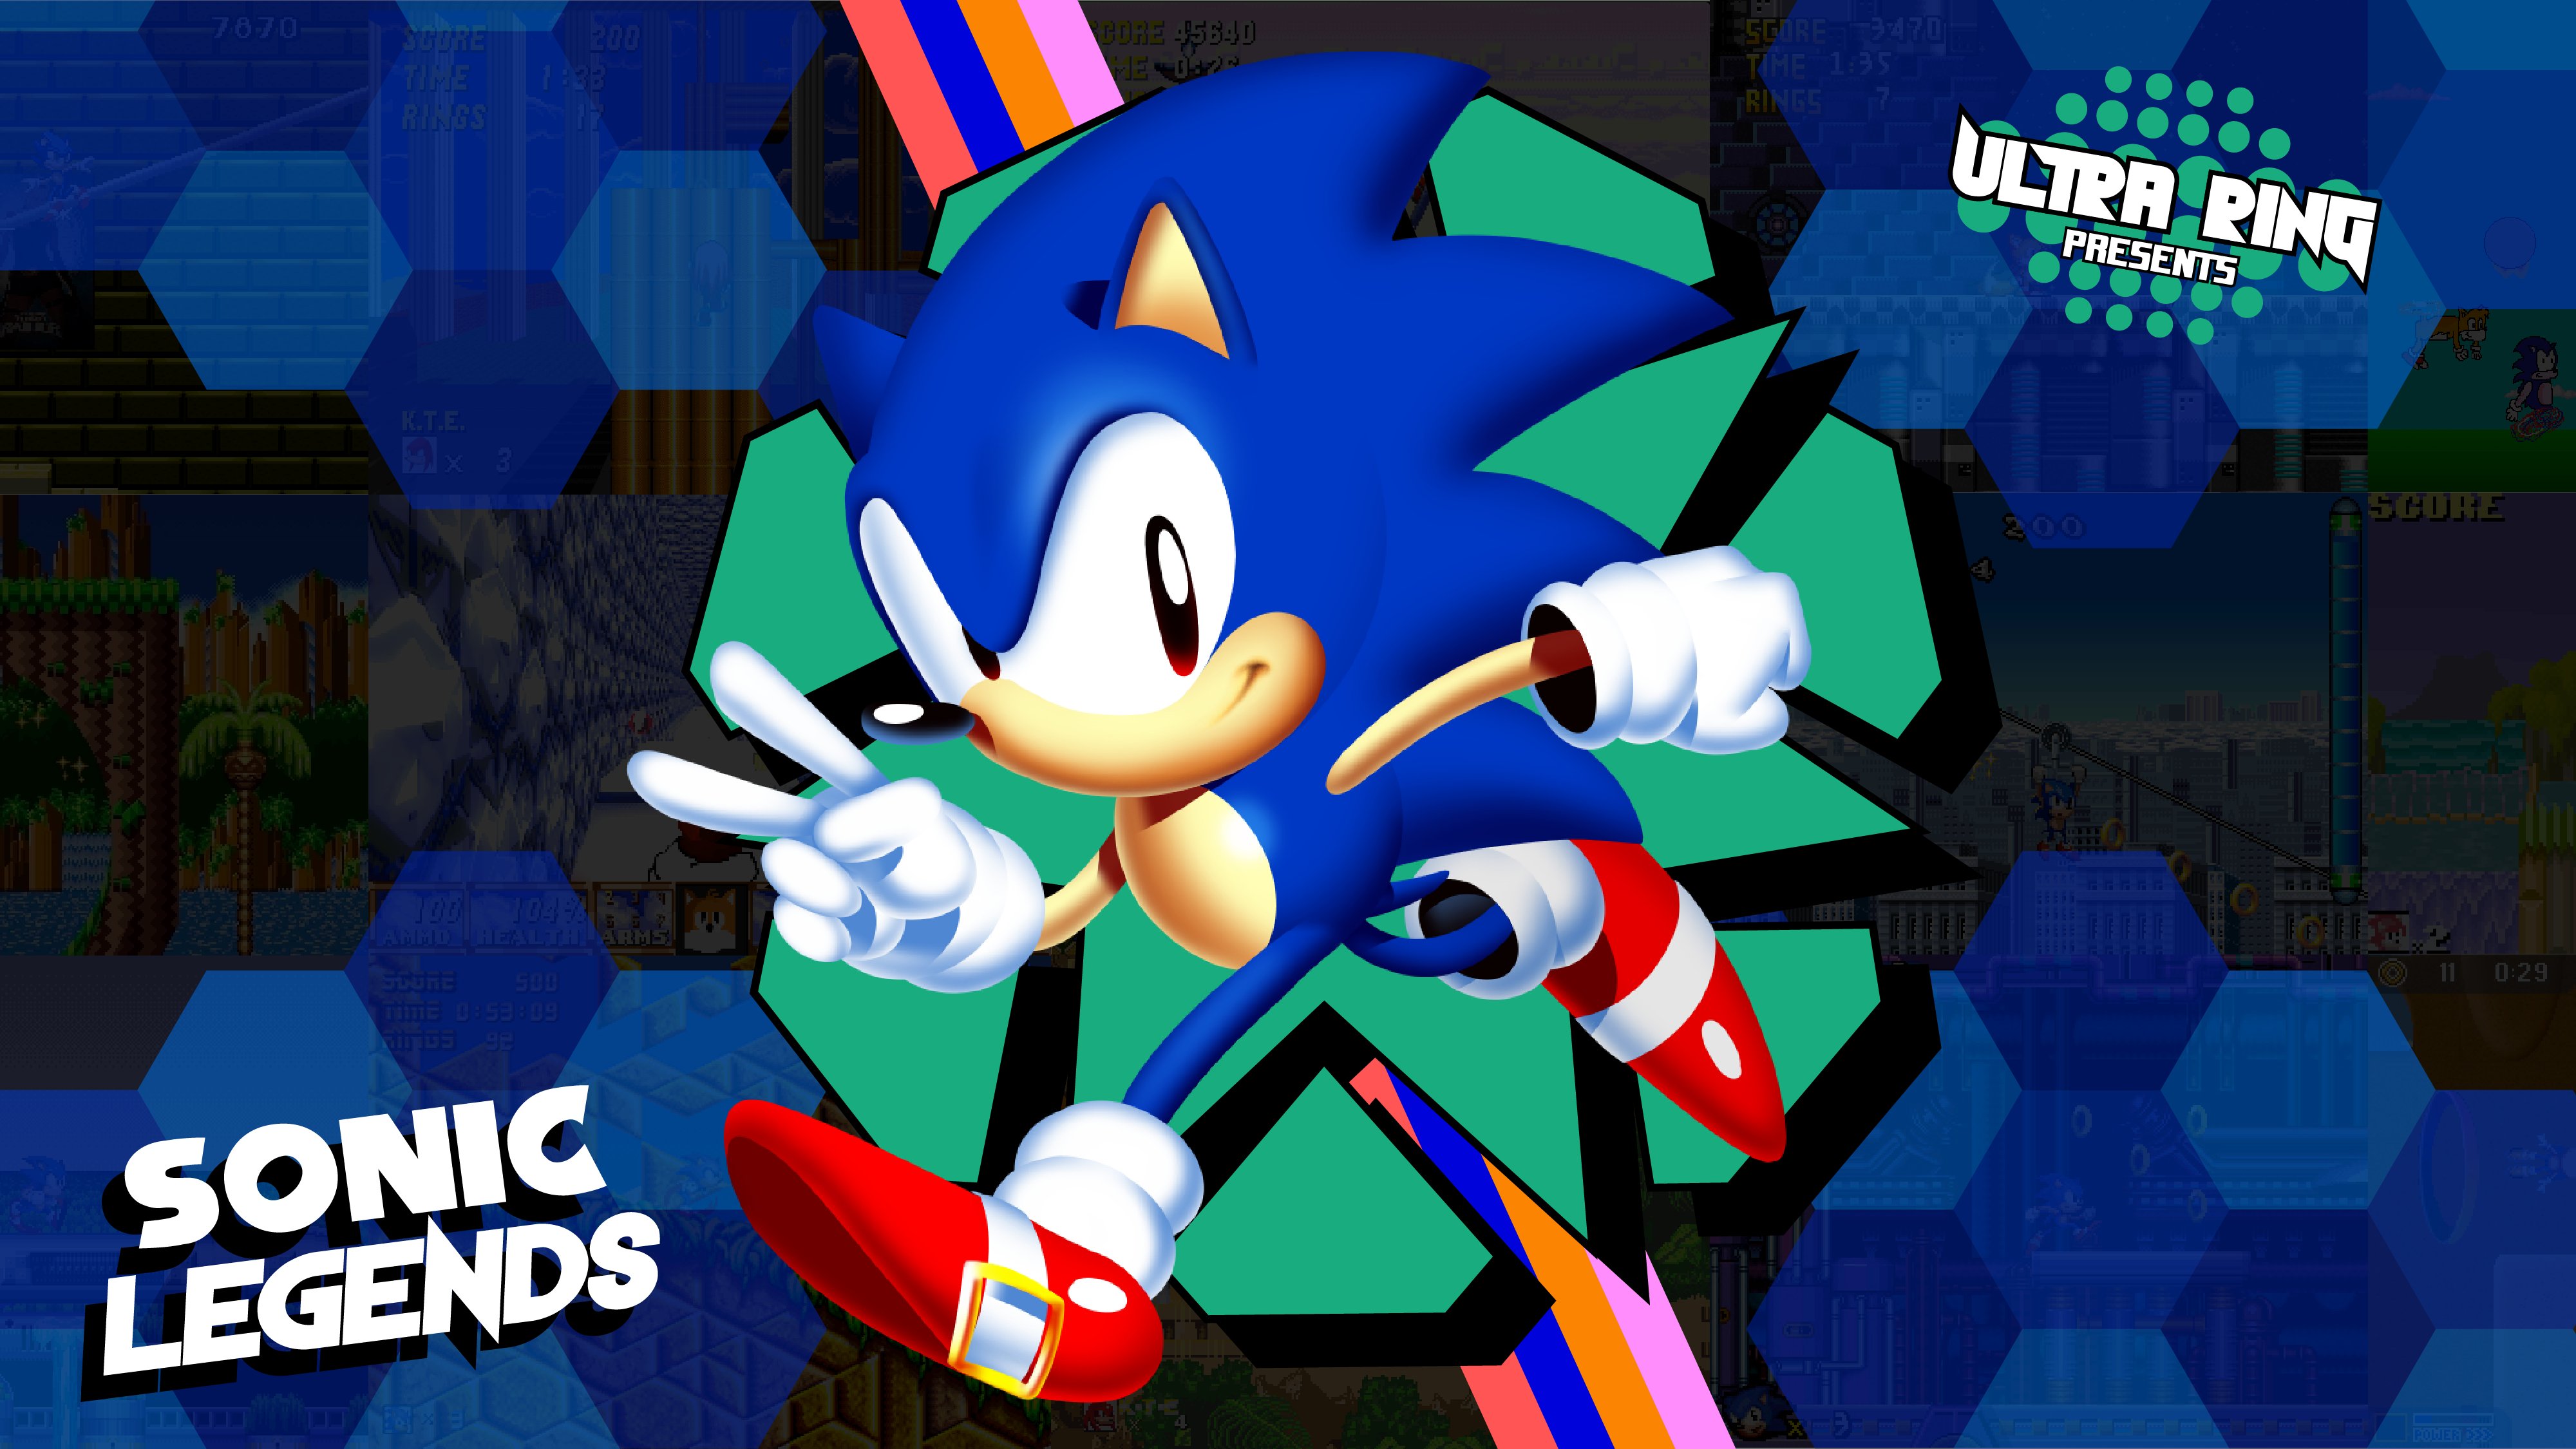 200+] Sonic Wallpapers